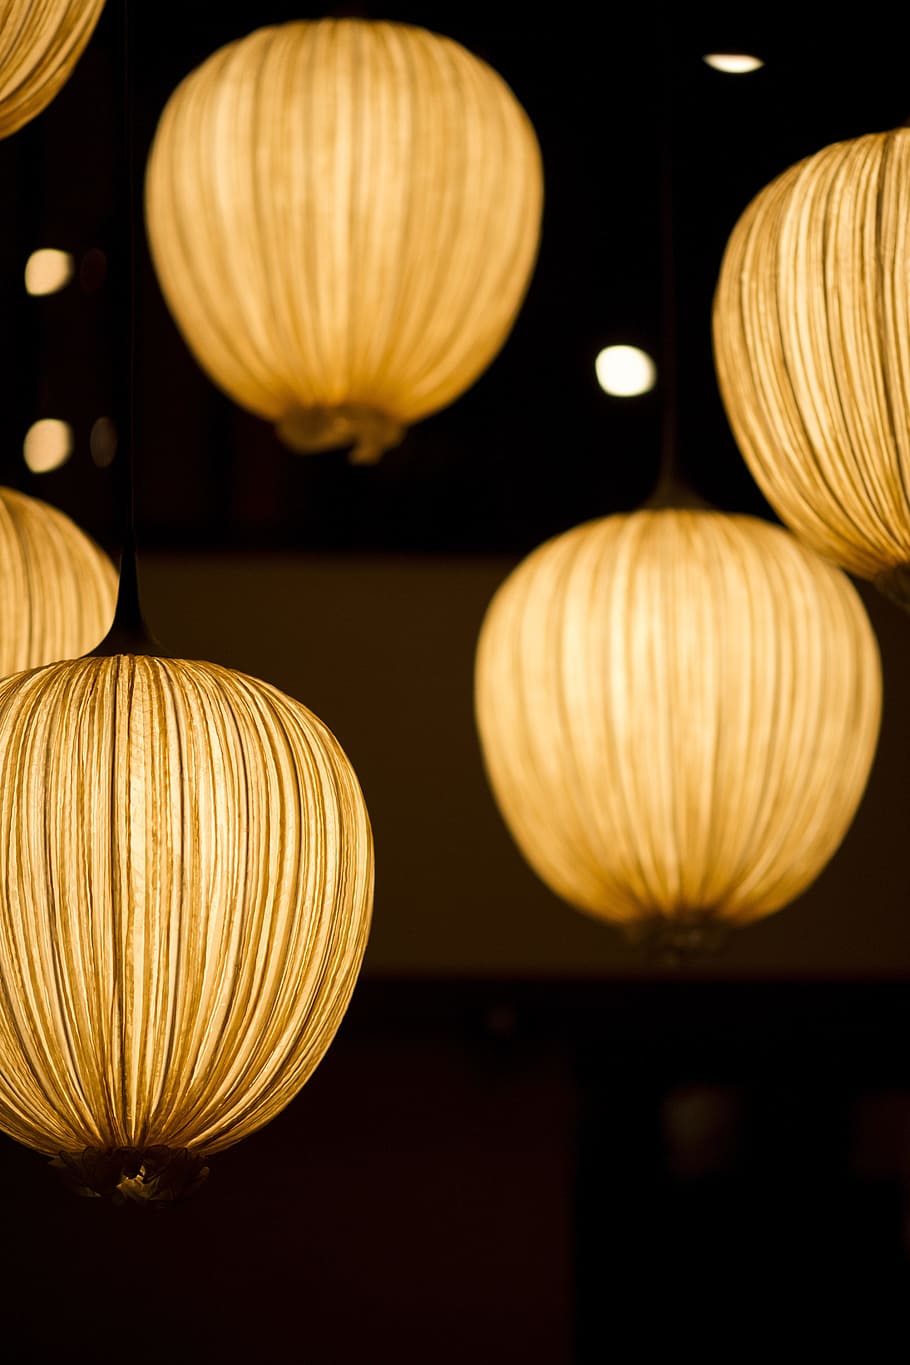 lighted round yellow lanterns in selective focus photography